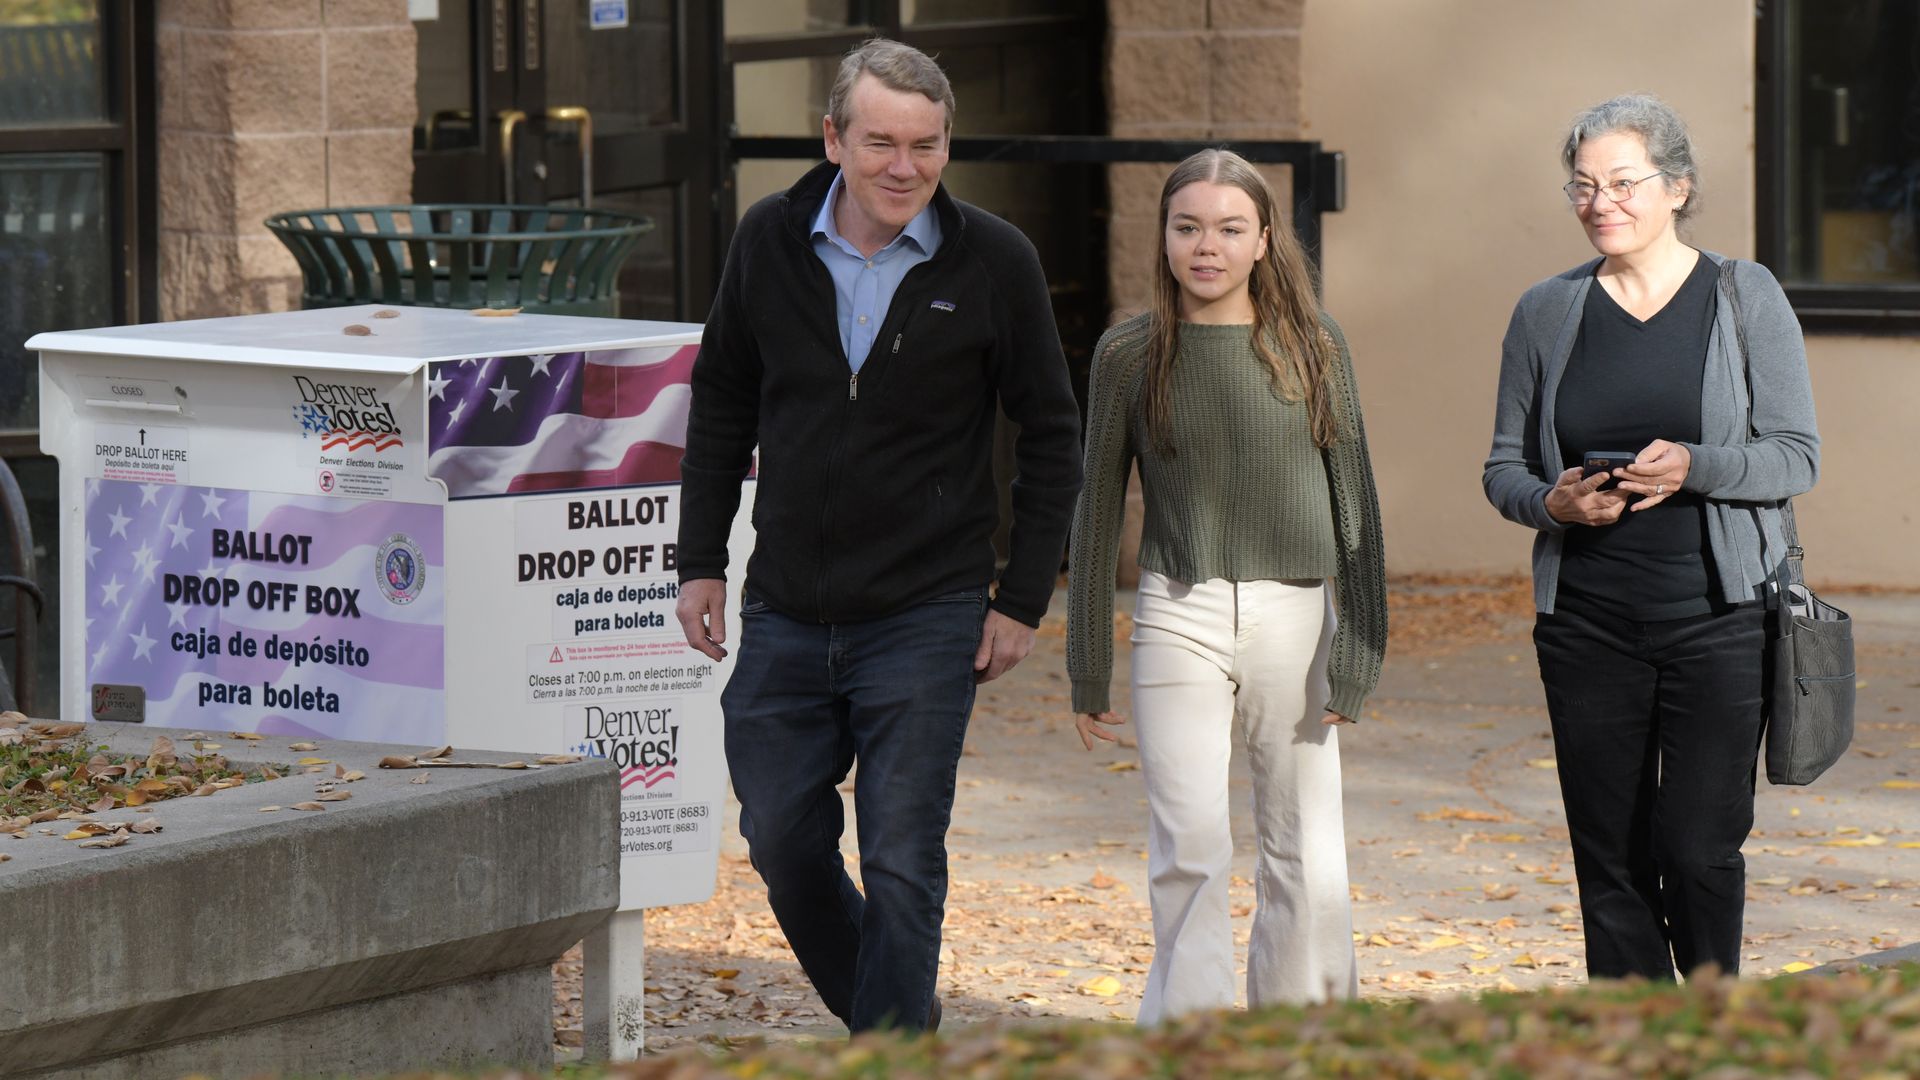 Sen. Michael Bennet, left, his wife Susan, right, and their daughter Anne drop off their ballots Wednesday at Washington Park in Denver. Photo: Hyoung Chang/The Denver Post